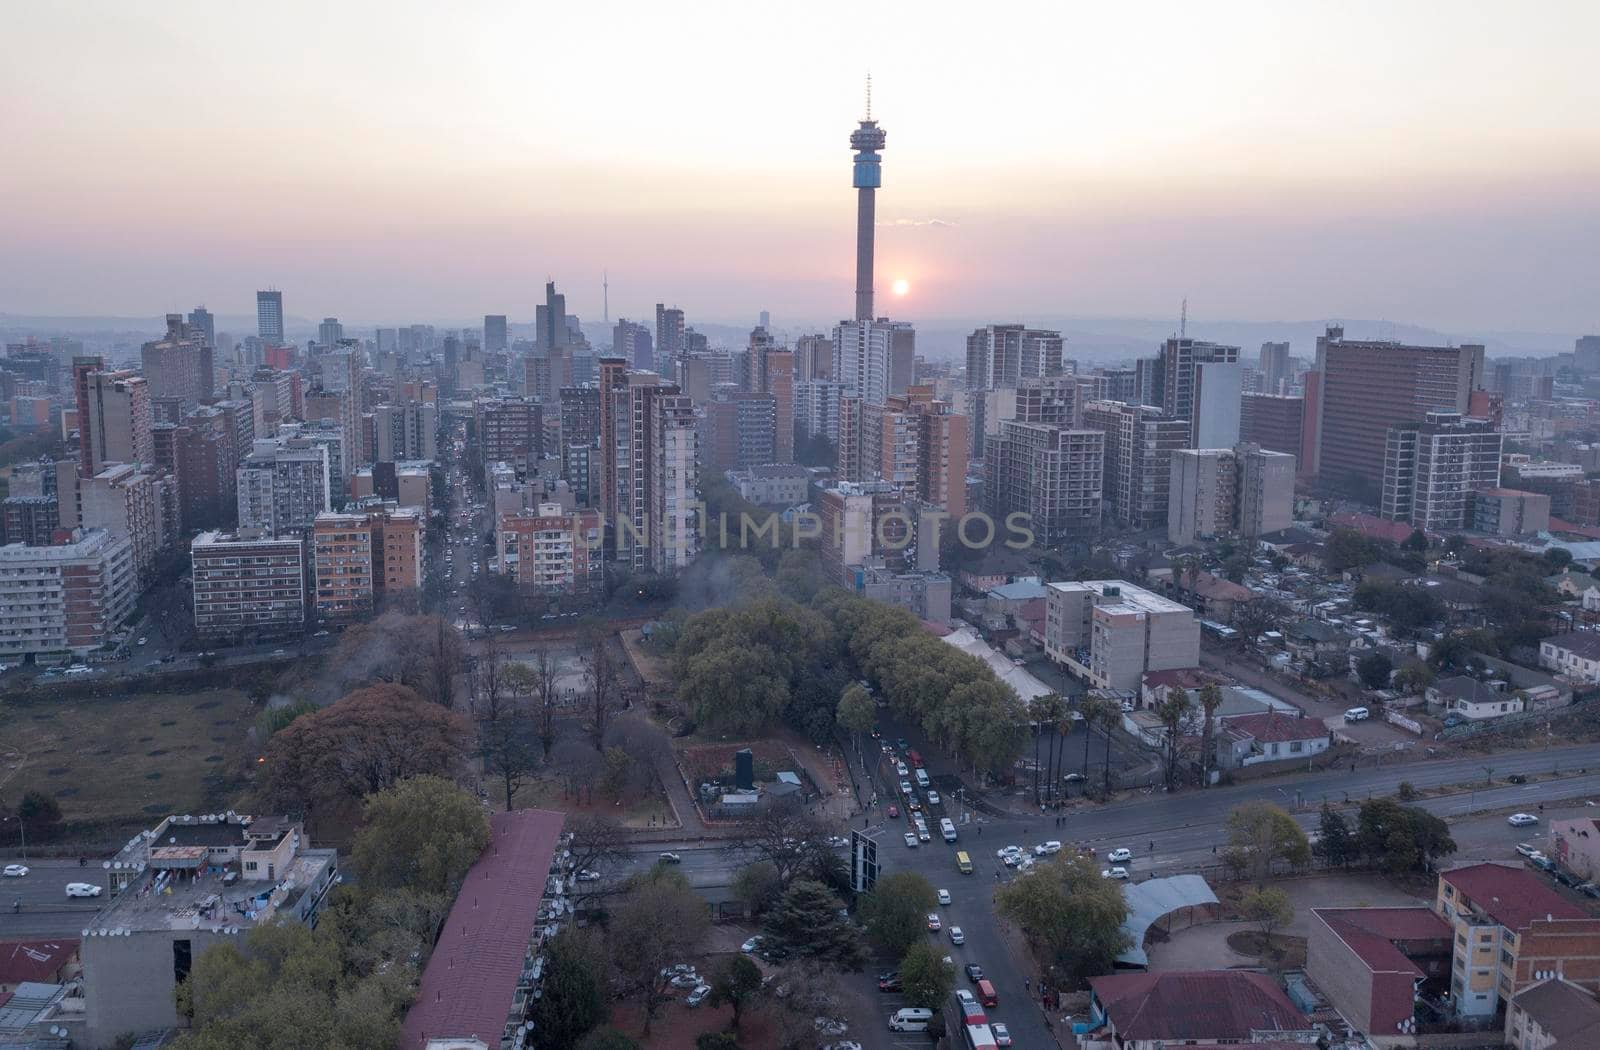 Aerial view of Johannesburg CBD at sunset, South Africa by fivepointsix